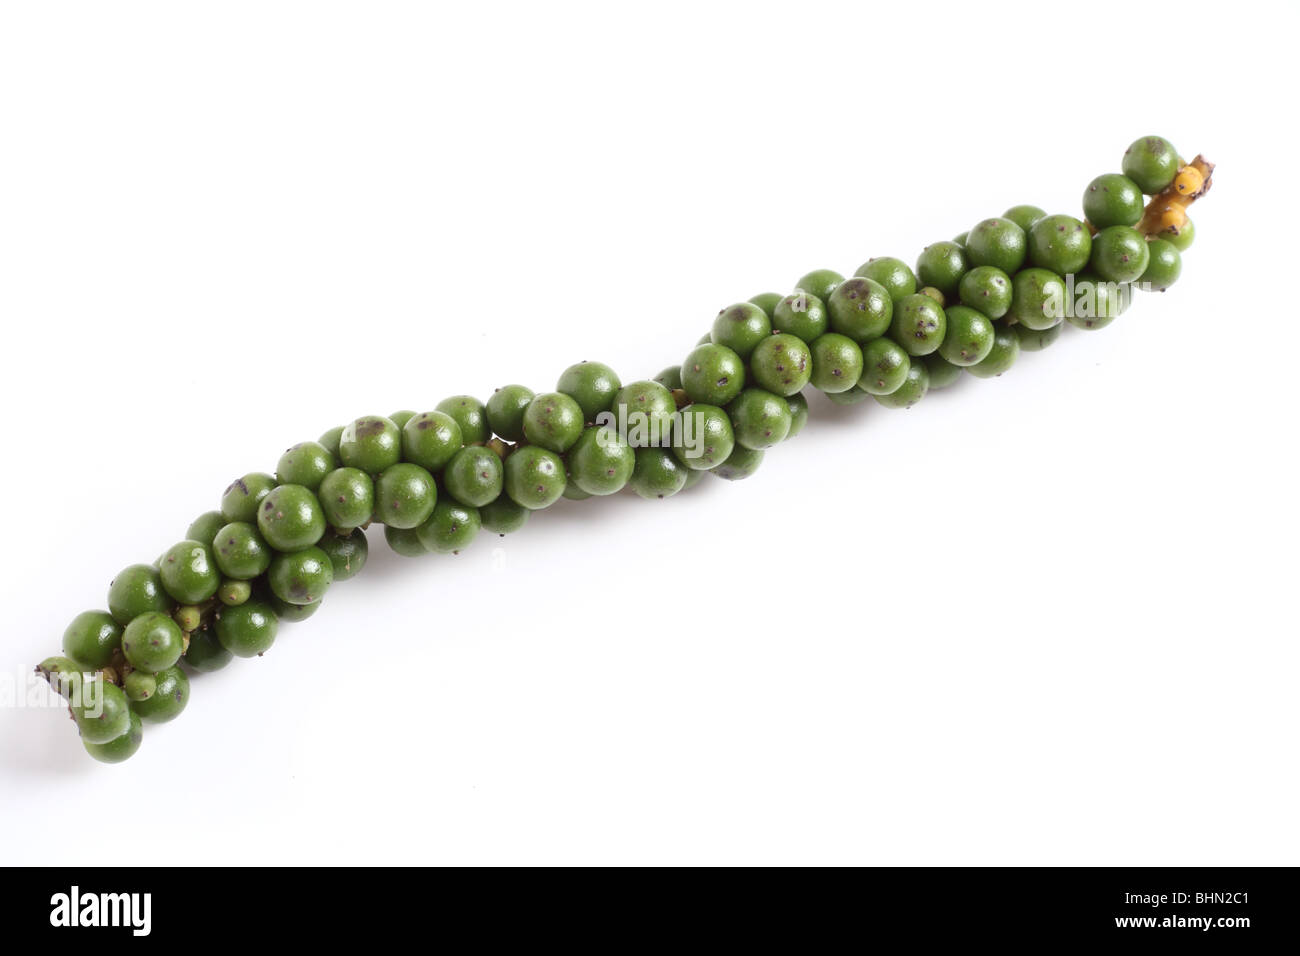 A drupe of green peppercorns from the vine, over white with a light shadow. Stock Photo